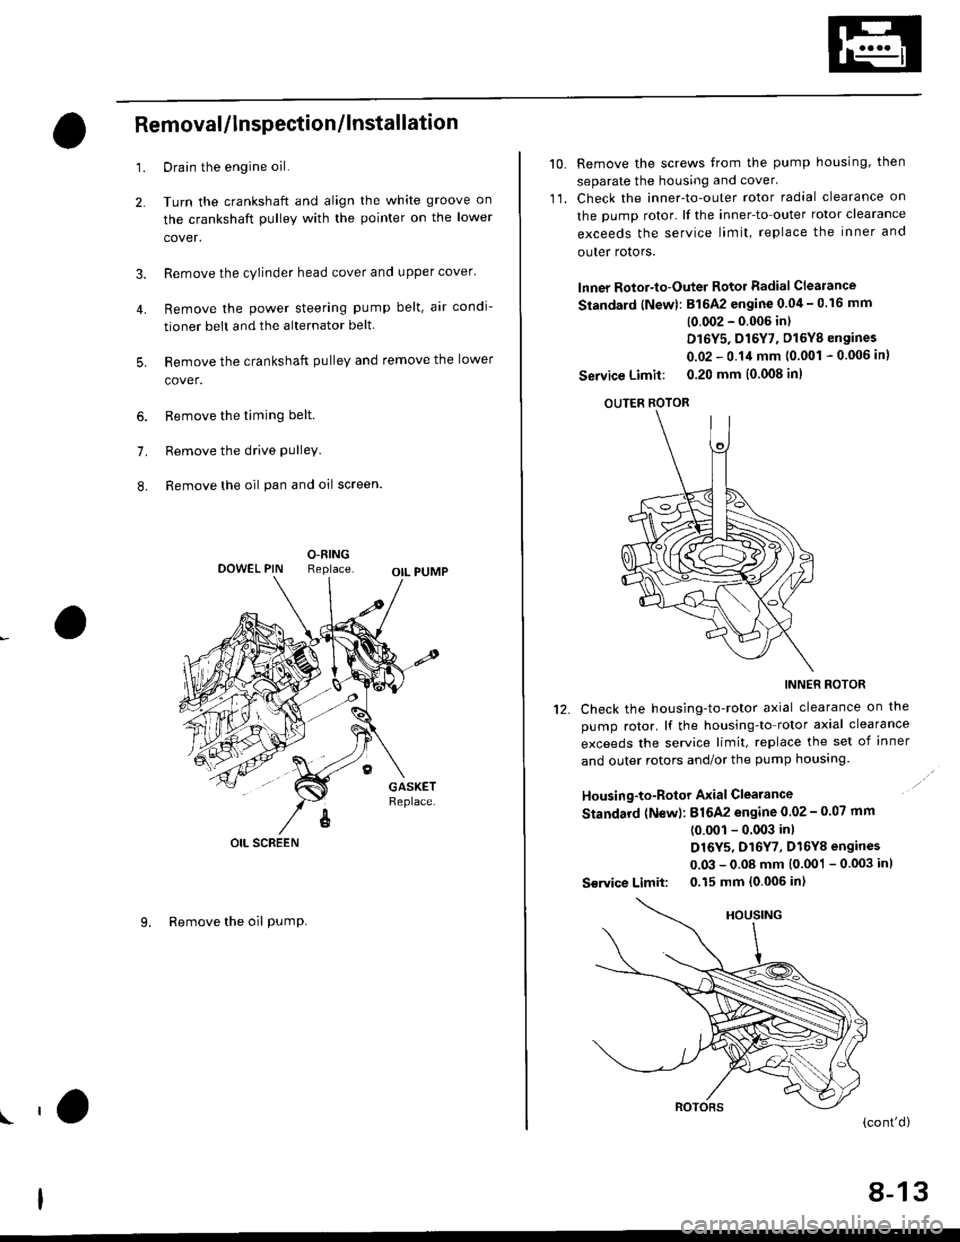 HONDA CIVIC 2000 6.G Workshop Manual 4.
Removal/lnspection/lnstallation
2.
3.
1.
5.
6.
1.
8.
Drain the engine oil.
Turn the crankshaft and align the white groove on
the crankshaft pulley with the pointer on the lower
cover.
Remove the cy